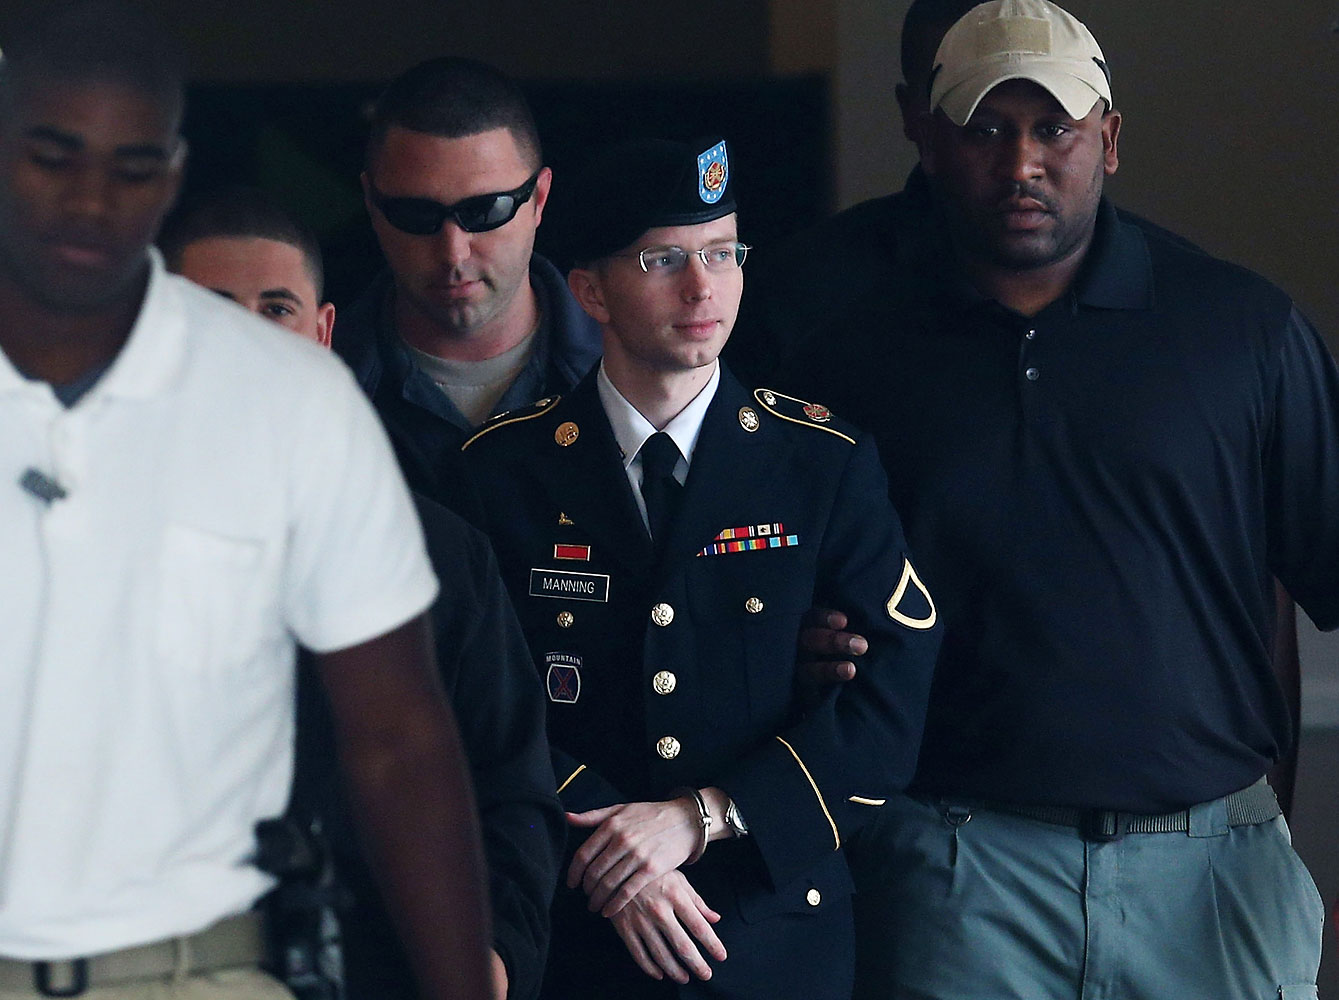 Army Private First Class Bradley Manning is escorted out of a military court facilityÊduring the sentencing phase of his trial Aug. 20, 2013 in Fort Meade, Maryland. 